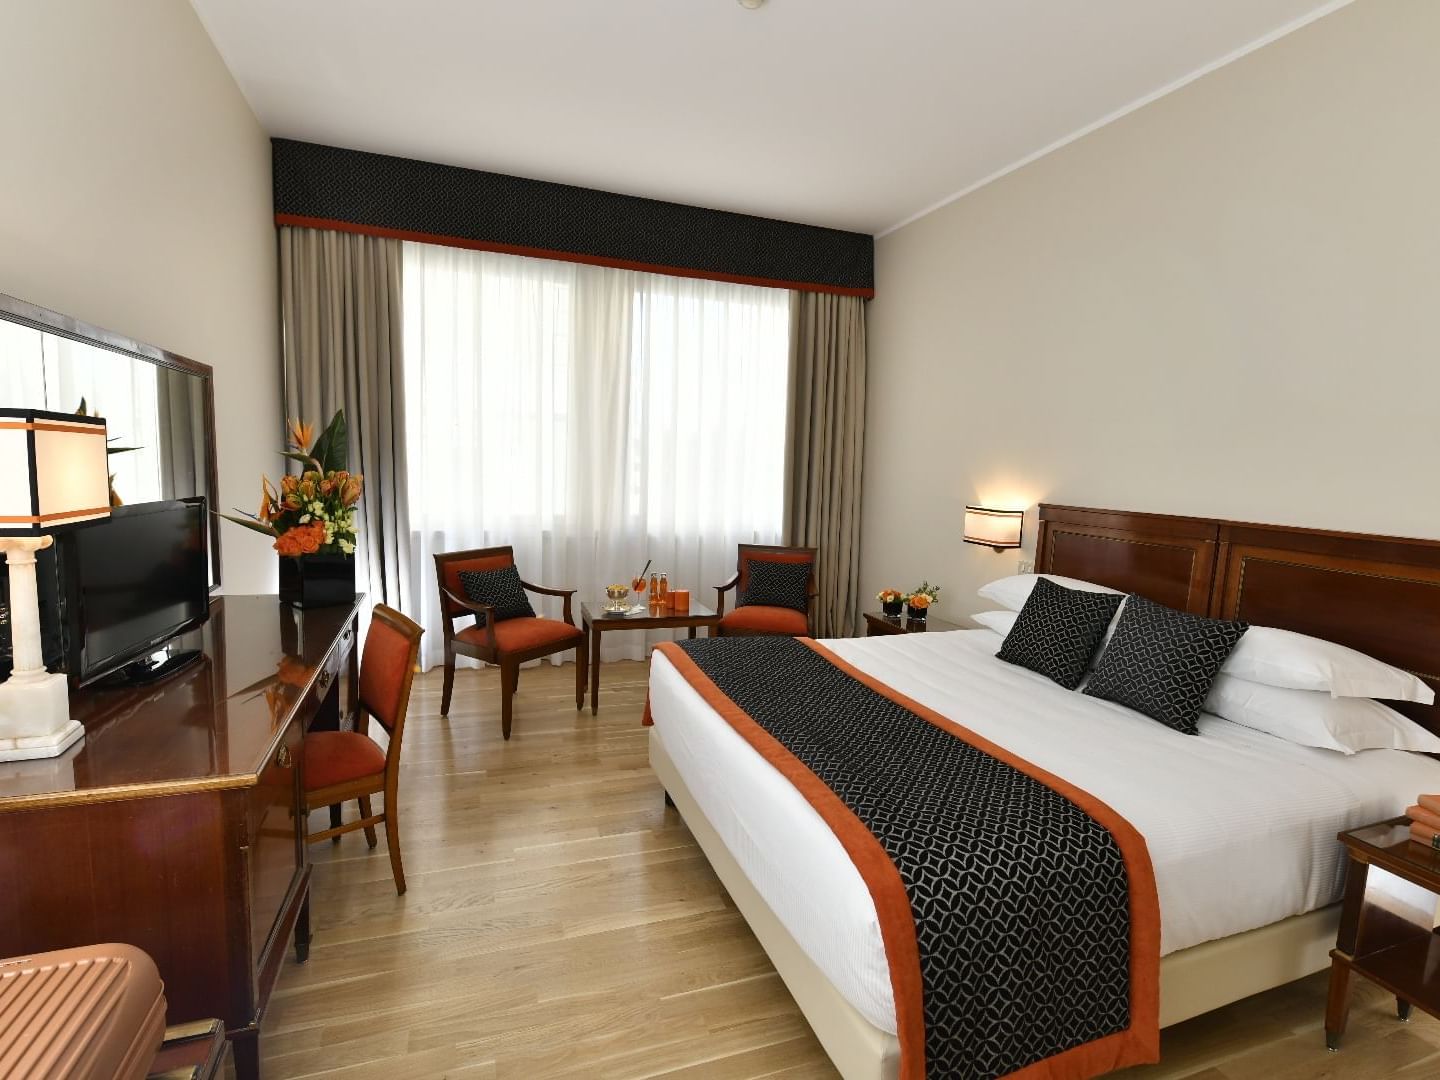 King bed, chairs with comfy pillows & Work desk with TV & Fresh Flowers in Deco Classic Room at Bettoja Hotel Mediterraneo